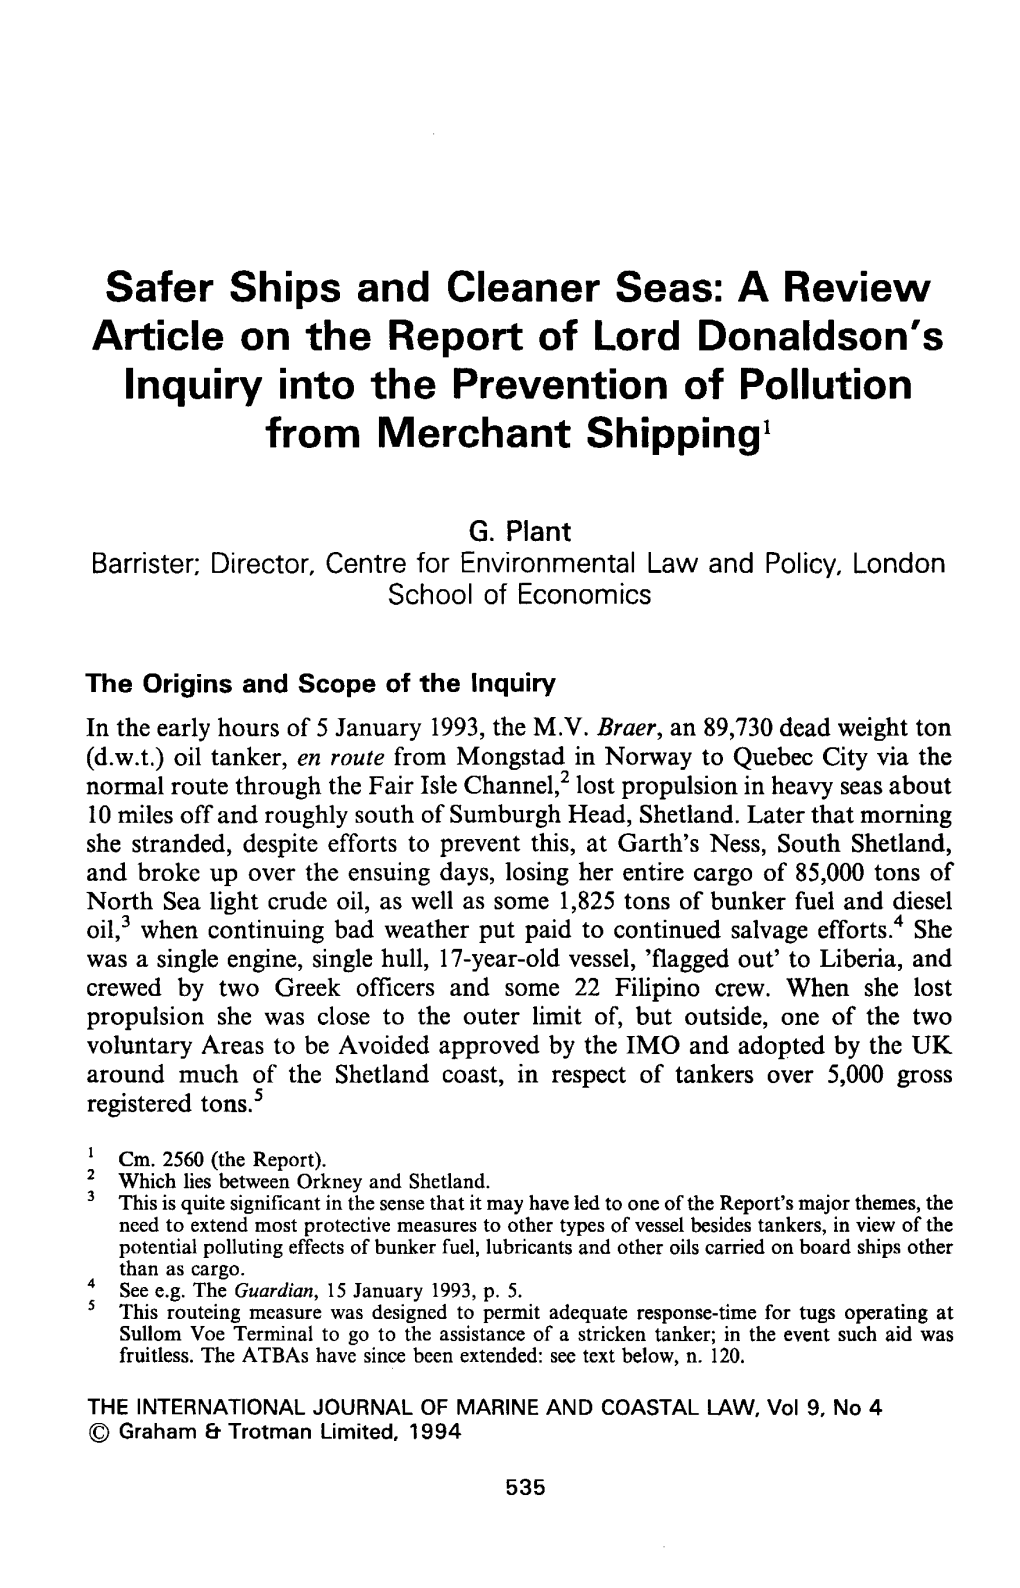 A Review Article on the Report of Lord Donaldson's Inquiry Into The